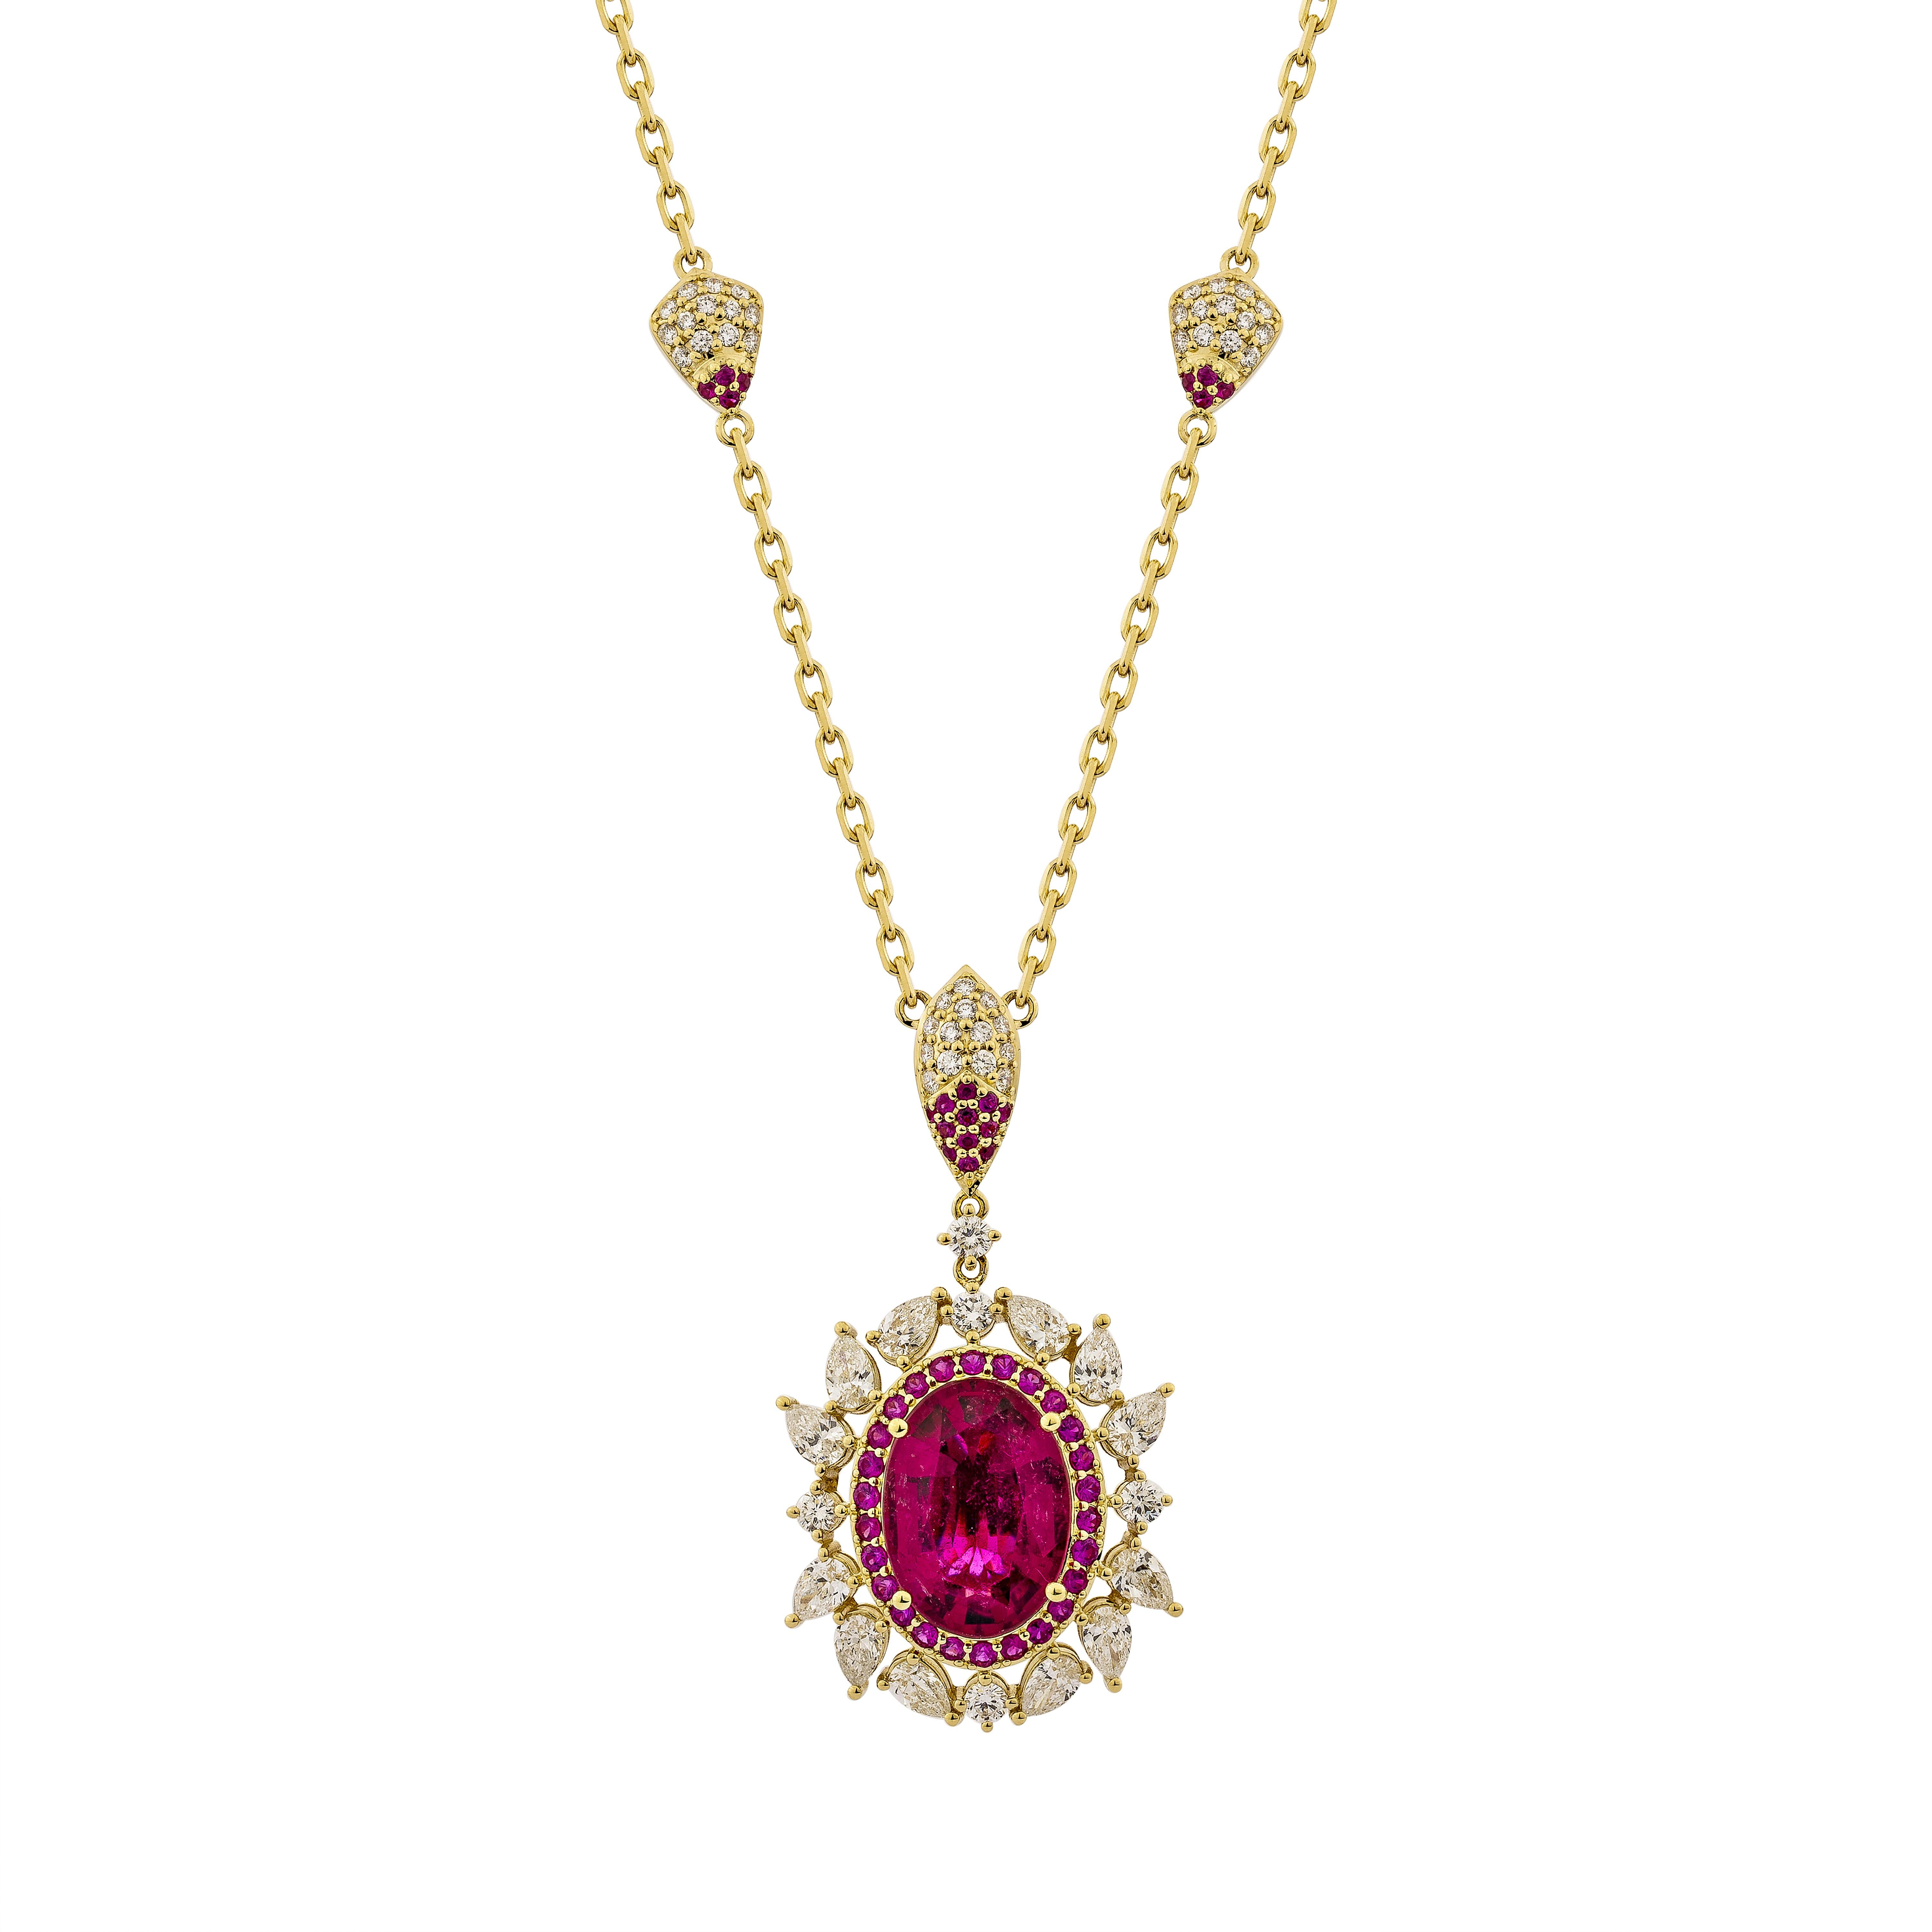 Oval Cut 7.994 Carat Rubellite Necklace in 18KYG with Ruby and White Diamond. For Sale